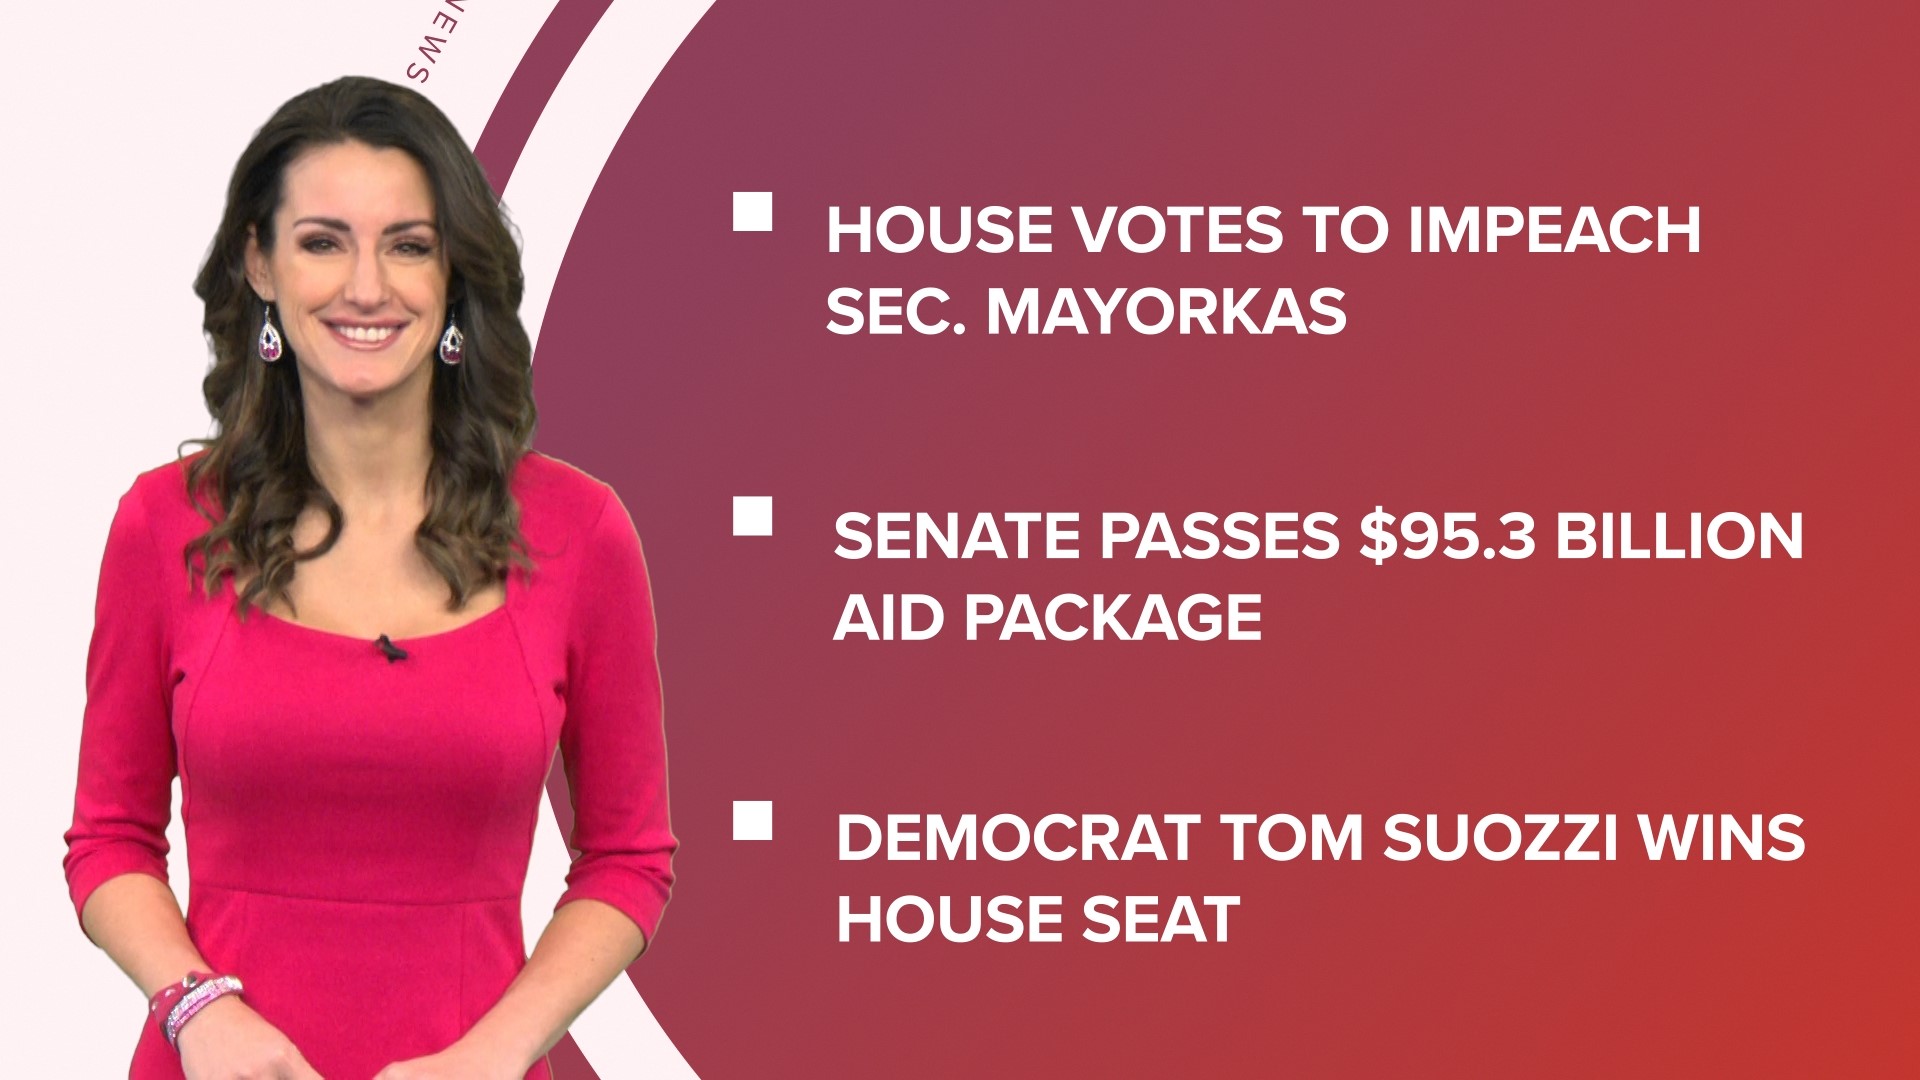 A look at what is happening in the news from the House voting to impeach Sec. Mayorkas to copycat allegations lead to 'plush wars' and tips to avoid romance scams.